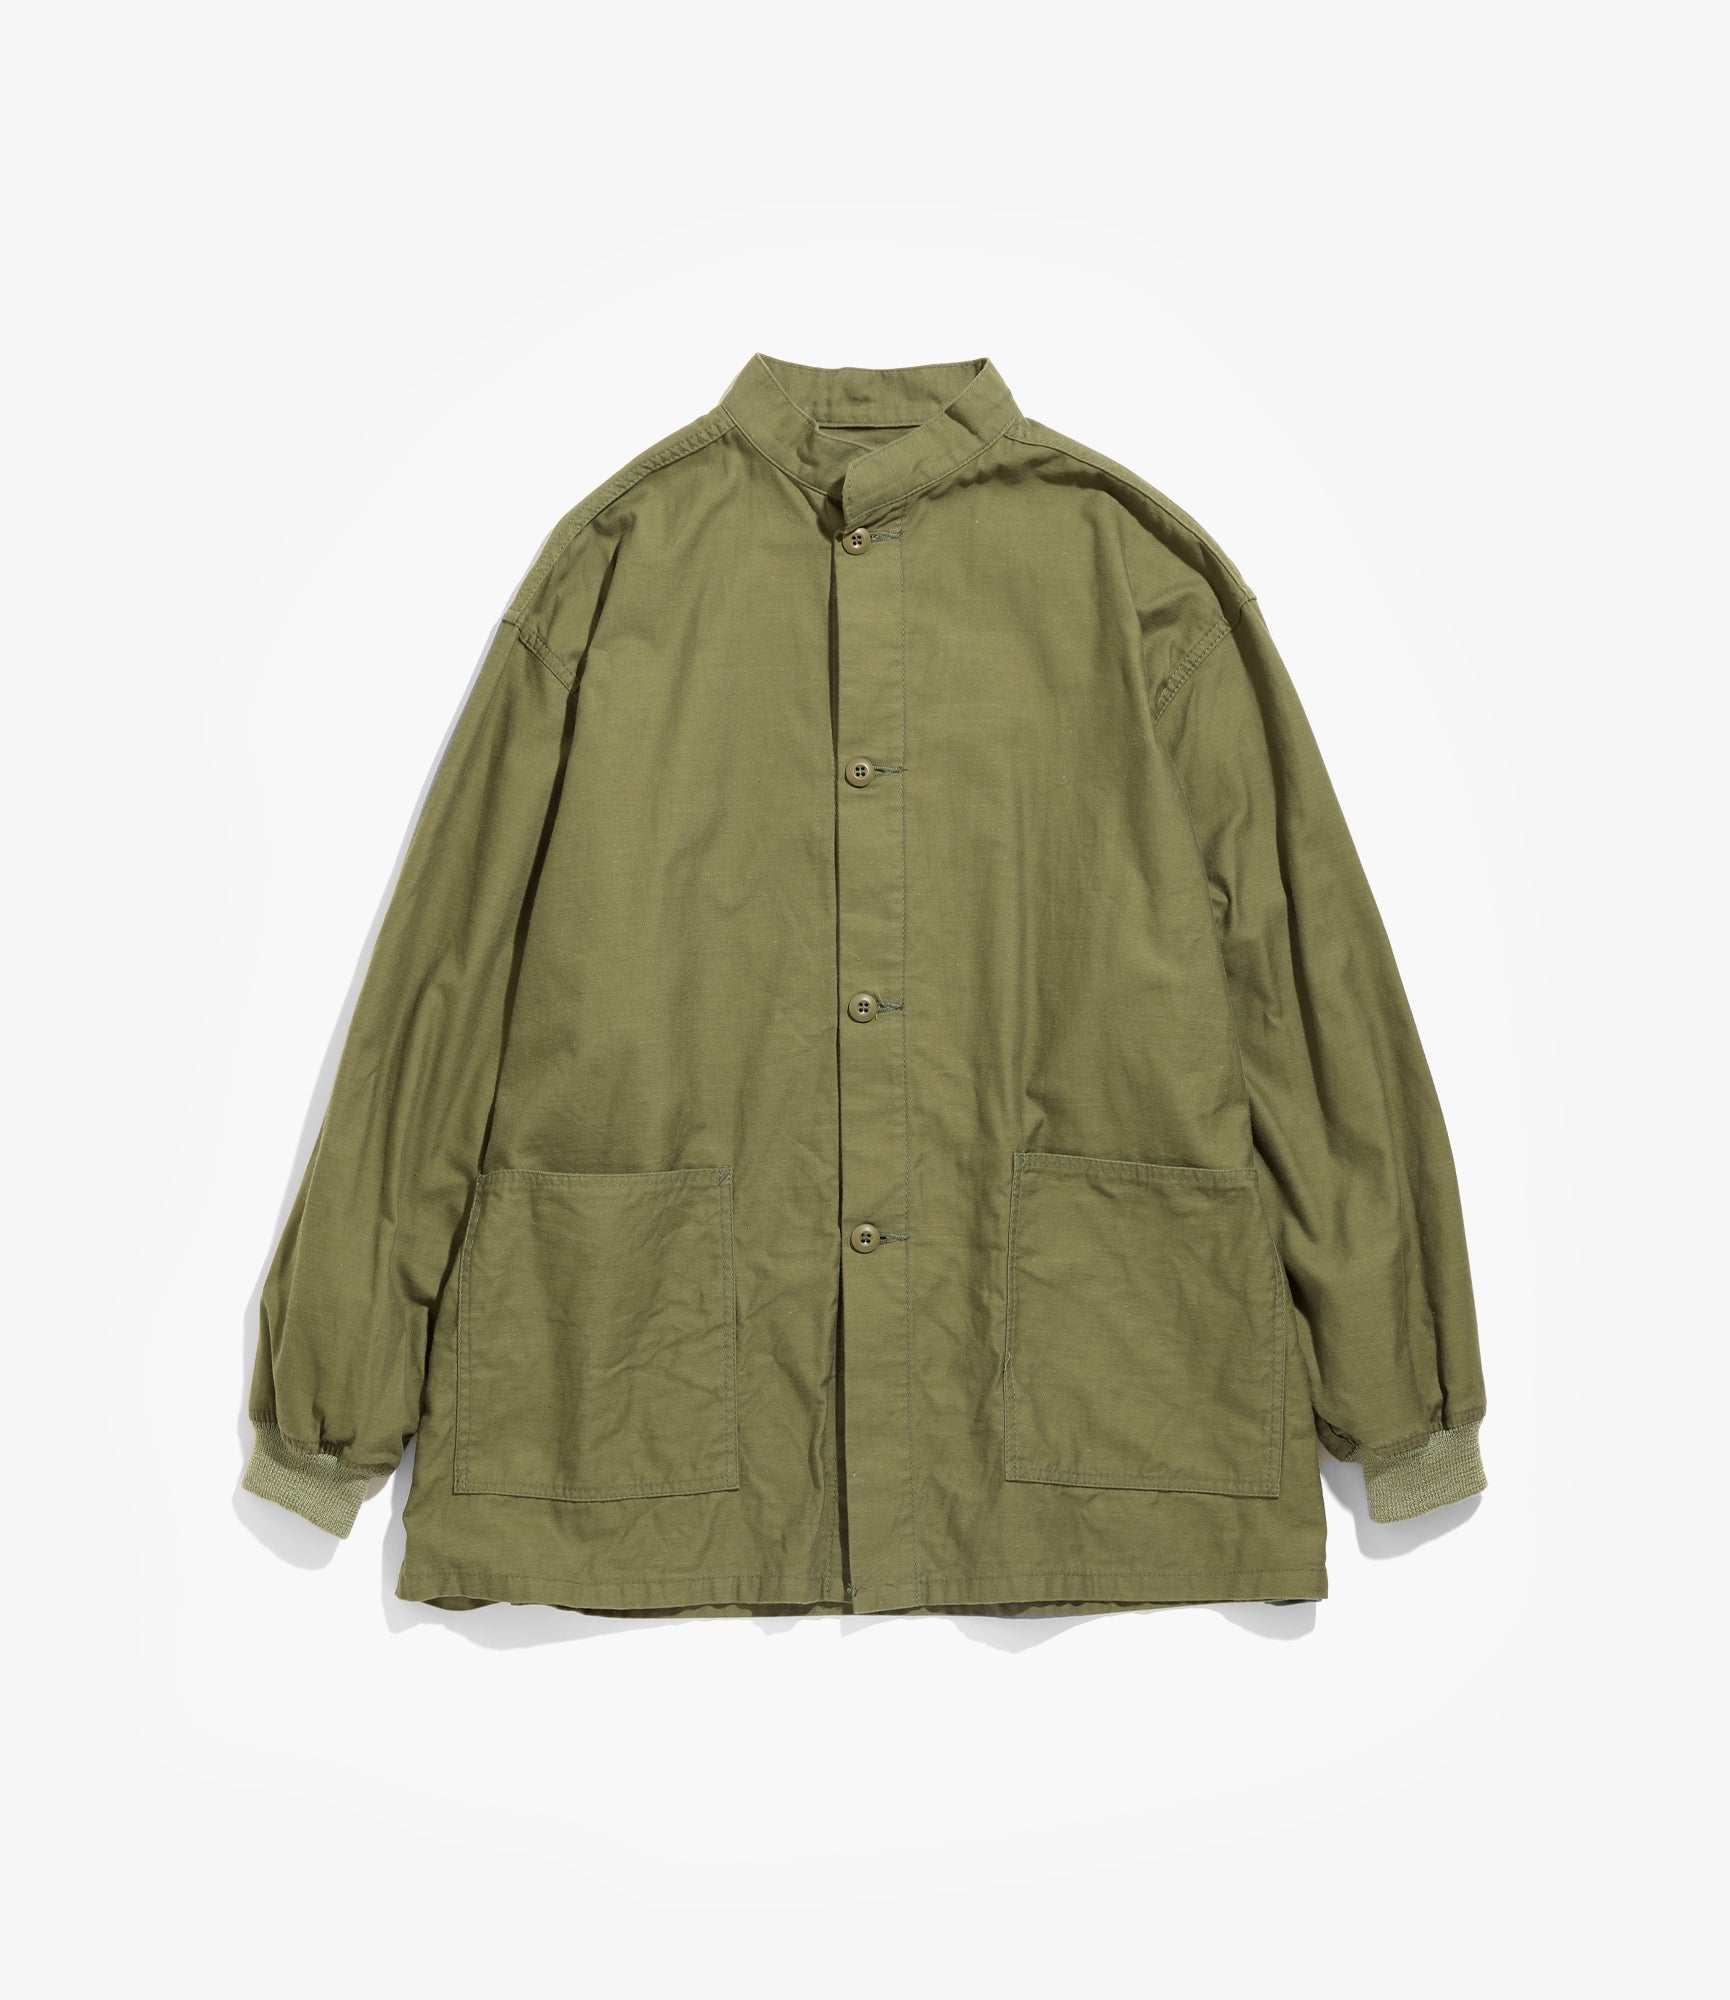 S.C. Army Shirt - Olive - Back Sateen